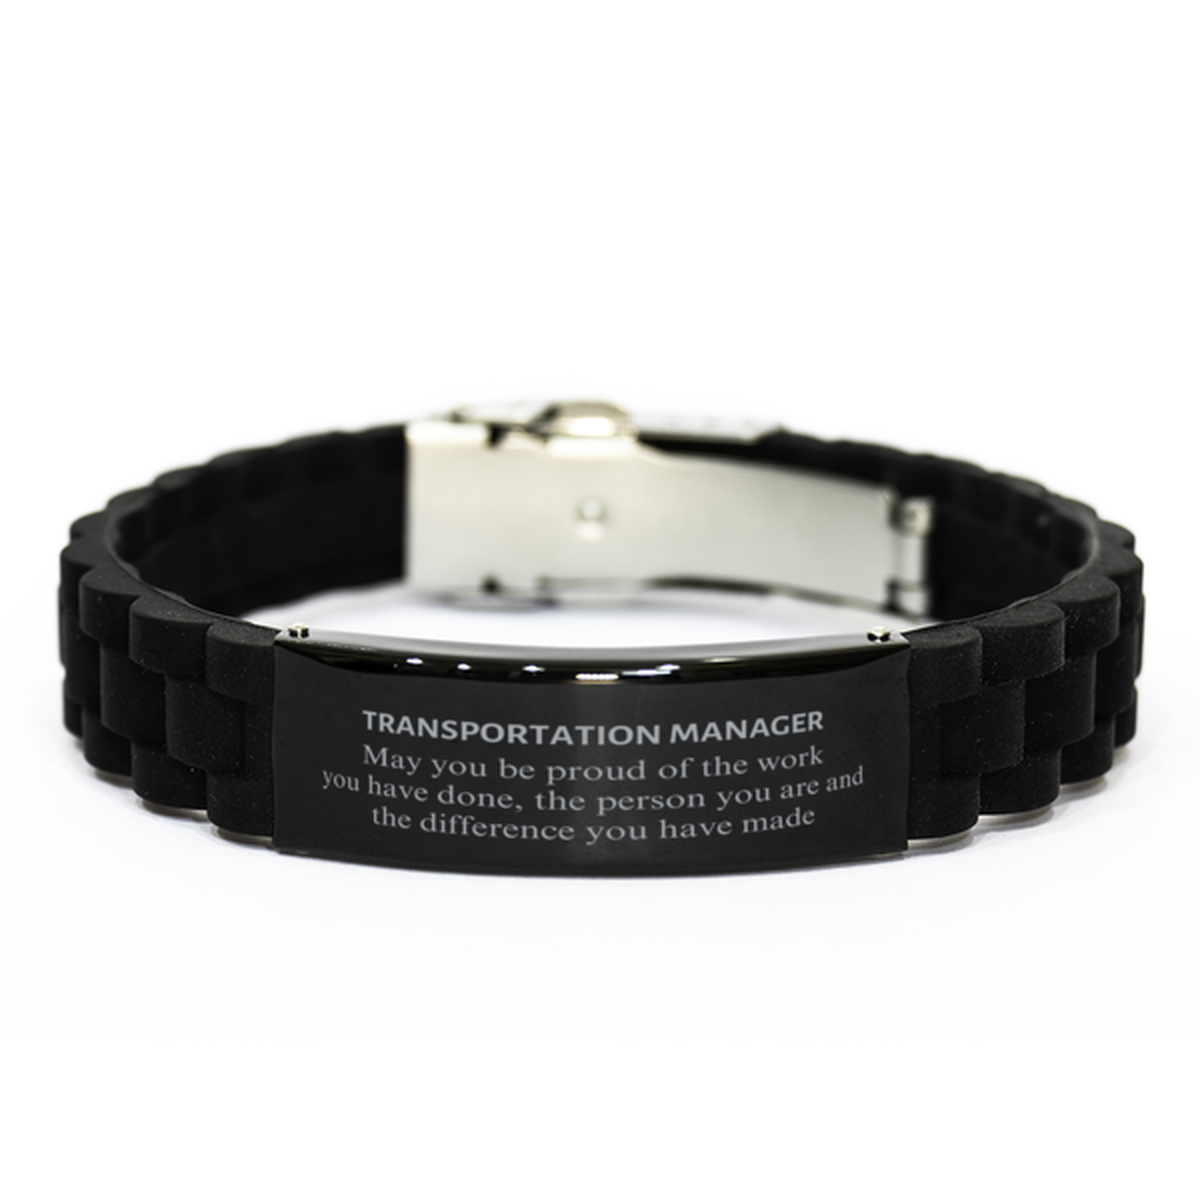 Transportation Manager May you be proud of the work you have done, Retirement Transportation Manager Black Glidelock Clasp Bracelet for Colleague Appreciation Gifts Amazing for Transportation Manager